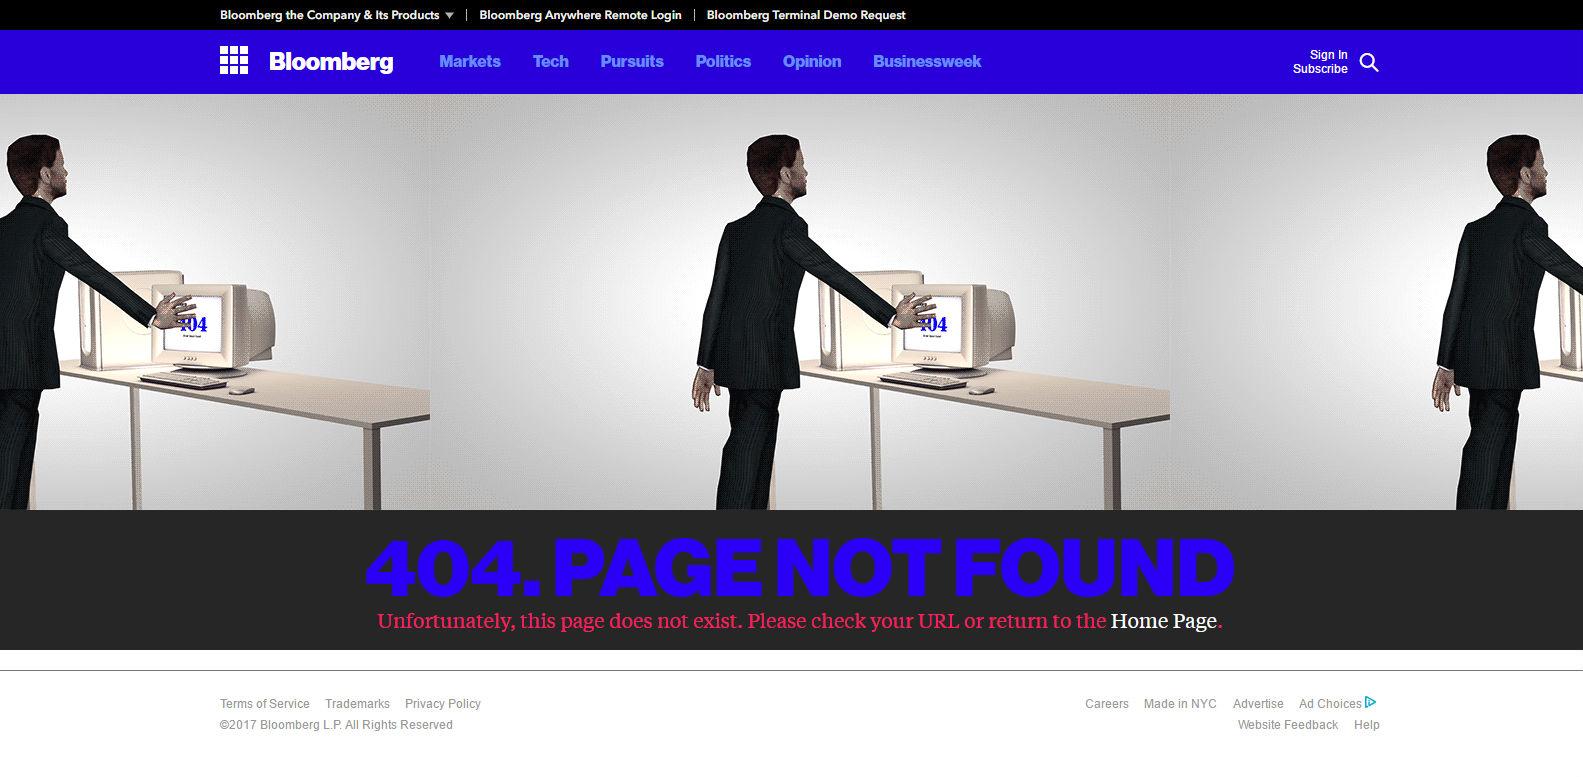 Bloomberg 404 page